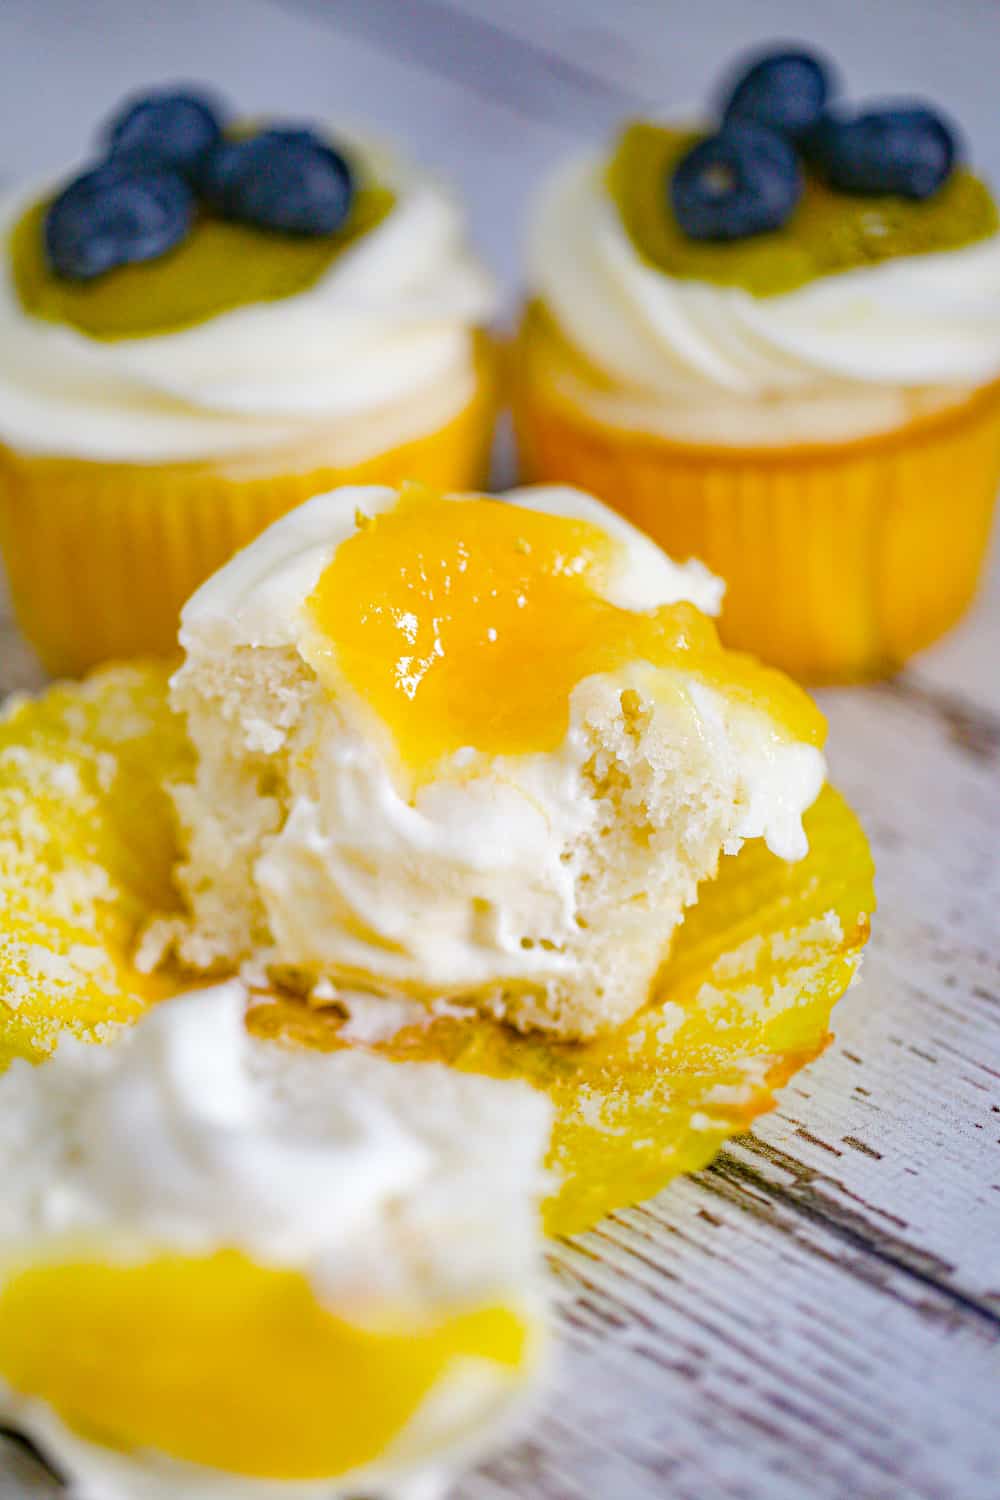 Triple Lemon filled Cupcakes recipe cream cheese frosting